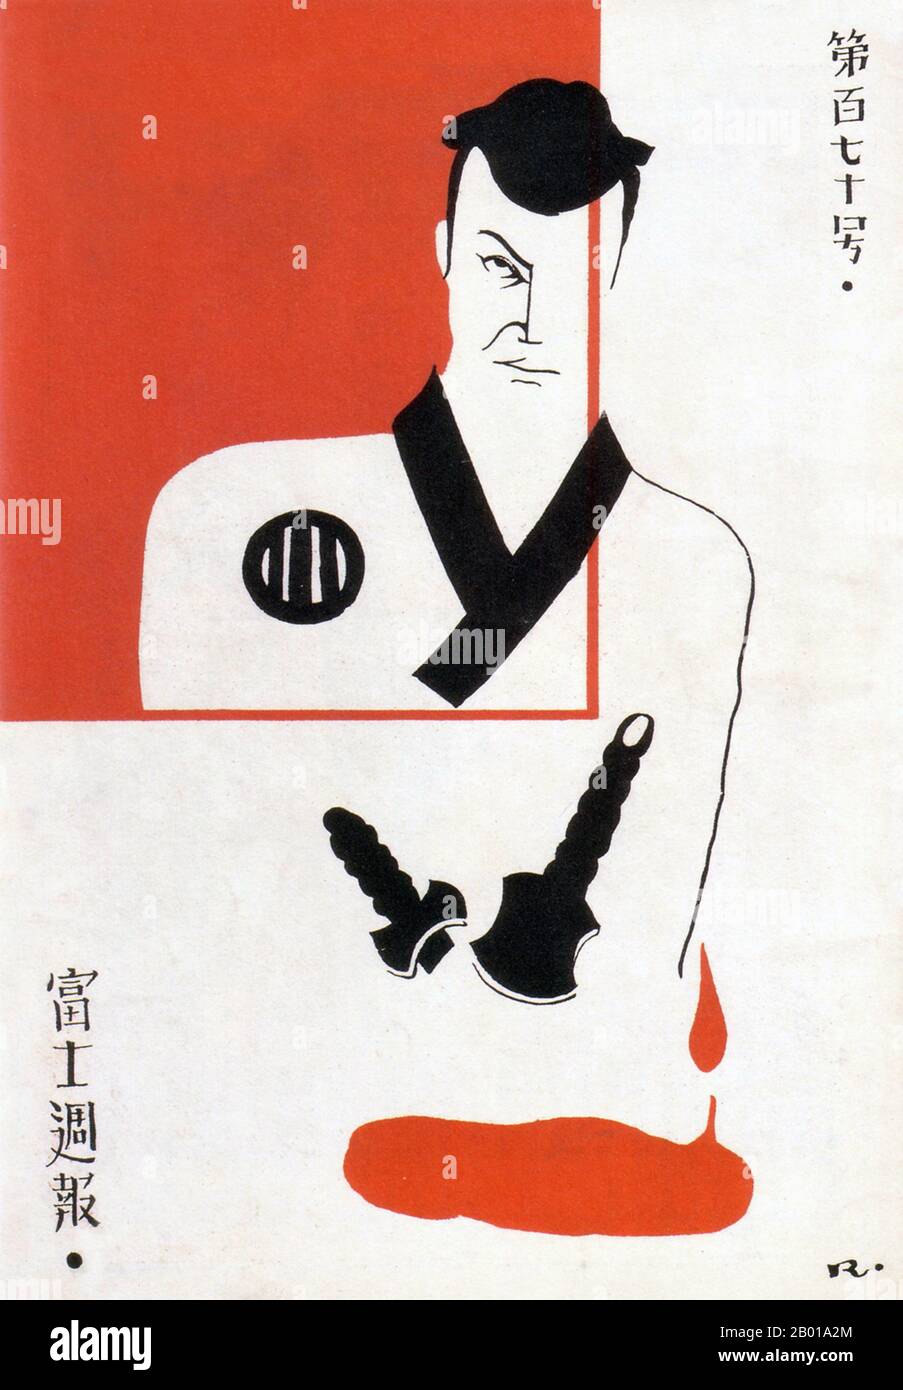 Japan:  Front cover of Fuji Magazine, c. 1930.  Between the end of the First World War in 1918 and the outbreak of the Pacific War in 1941, Japanese graphic design as represented in advertising posters, magazine covers and book covers underwent a series of changes characterised by increasing Western influence, a growing middle class, industrialisation and militarisation, as well as (initially) left wing political ideals and (subsequently) right wing nationalism and the influence of European Fascist art forms. Stock Photo